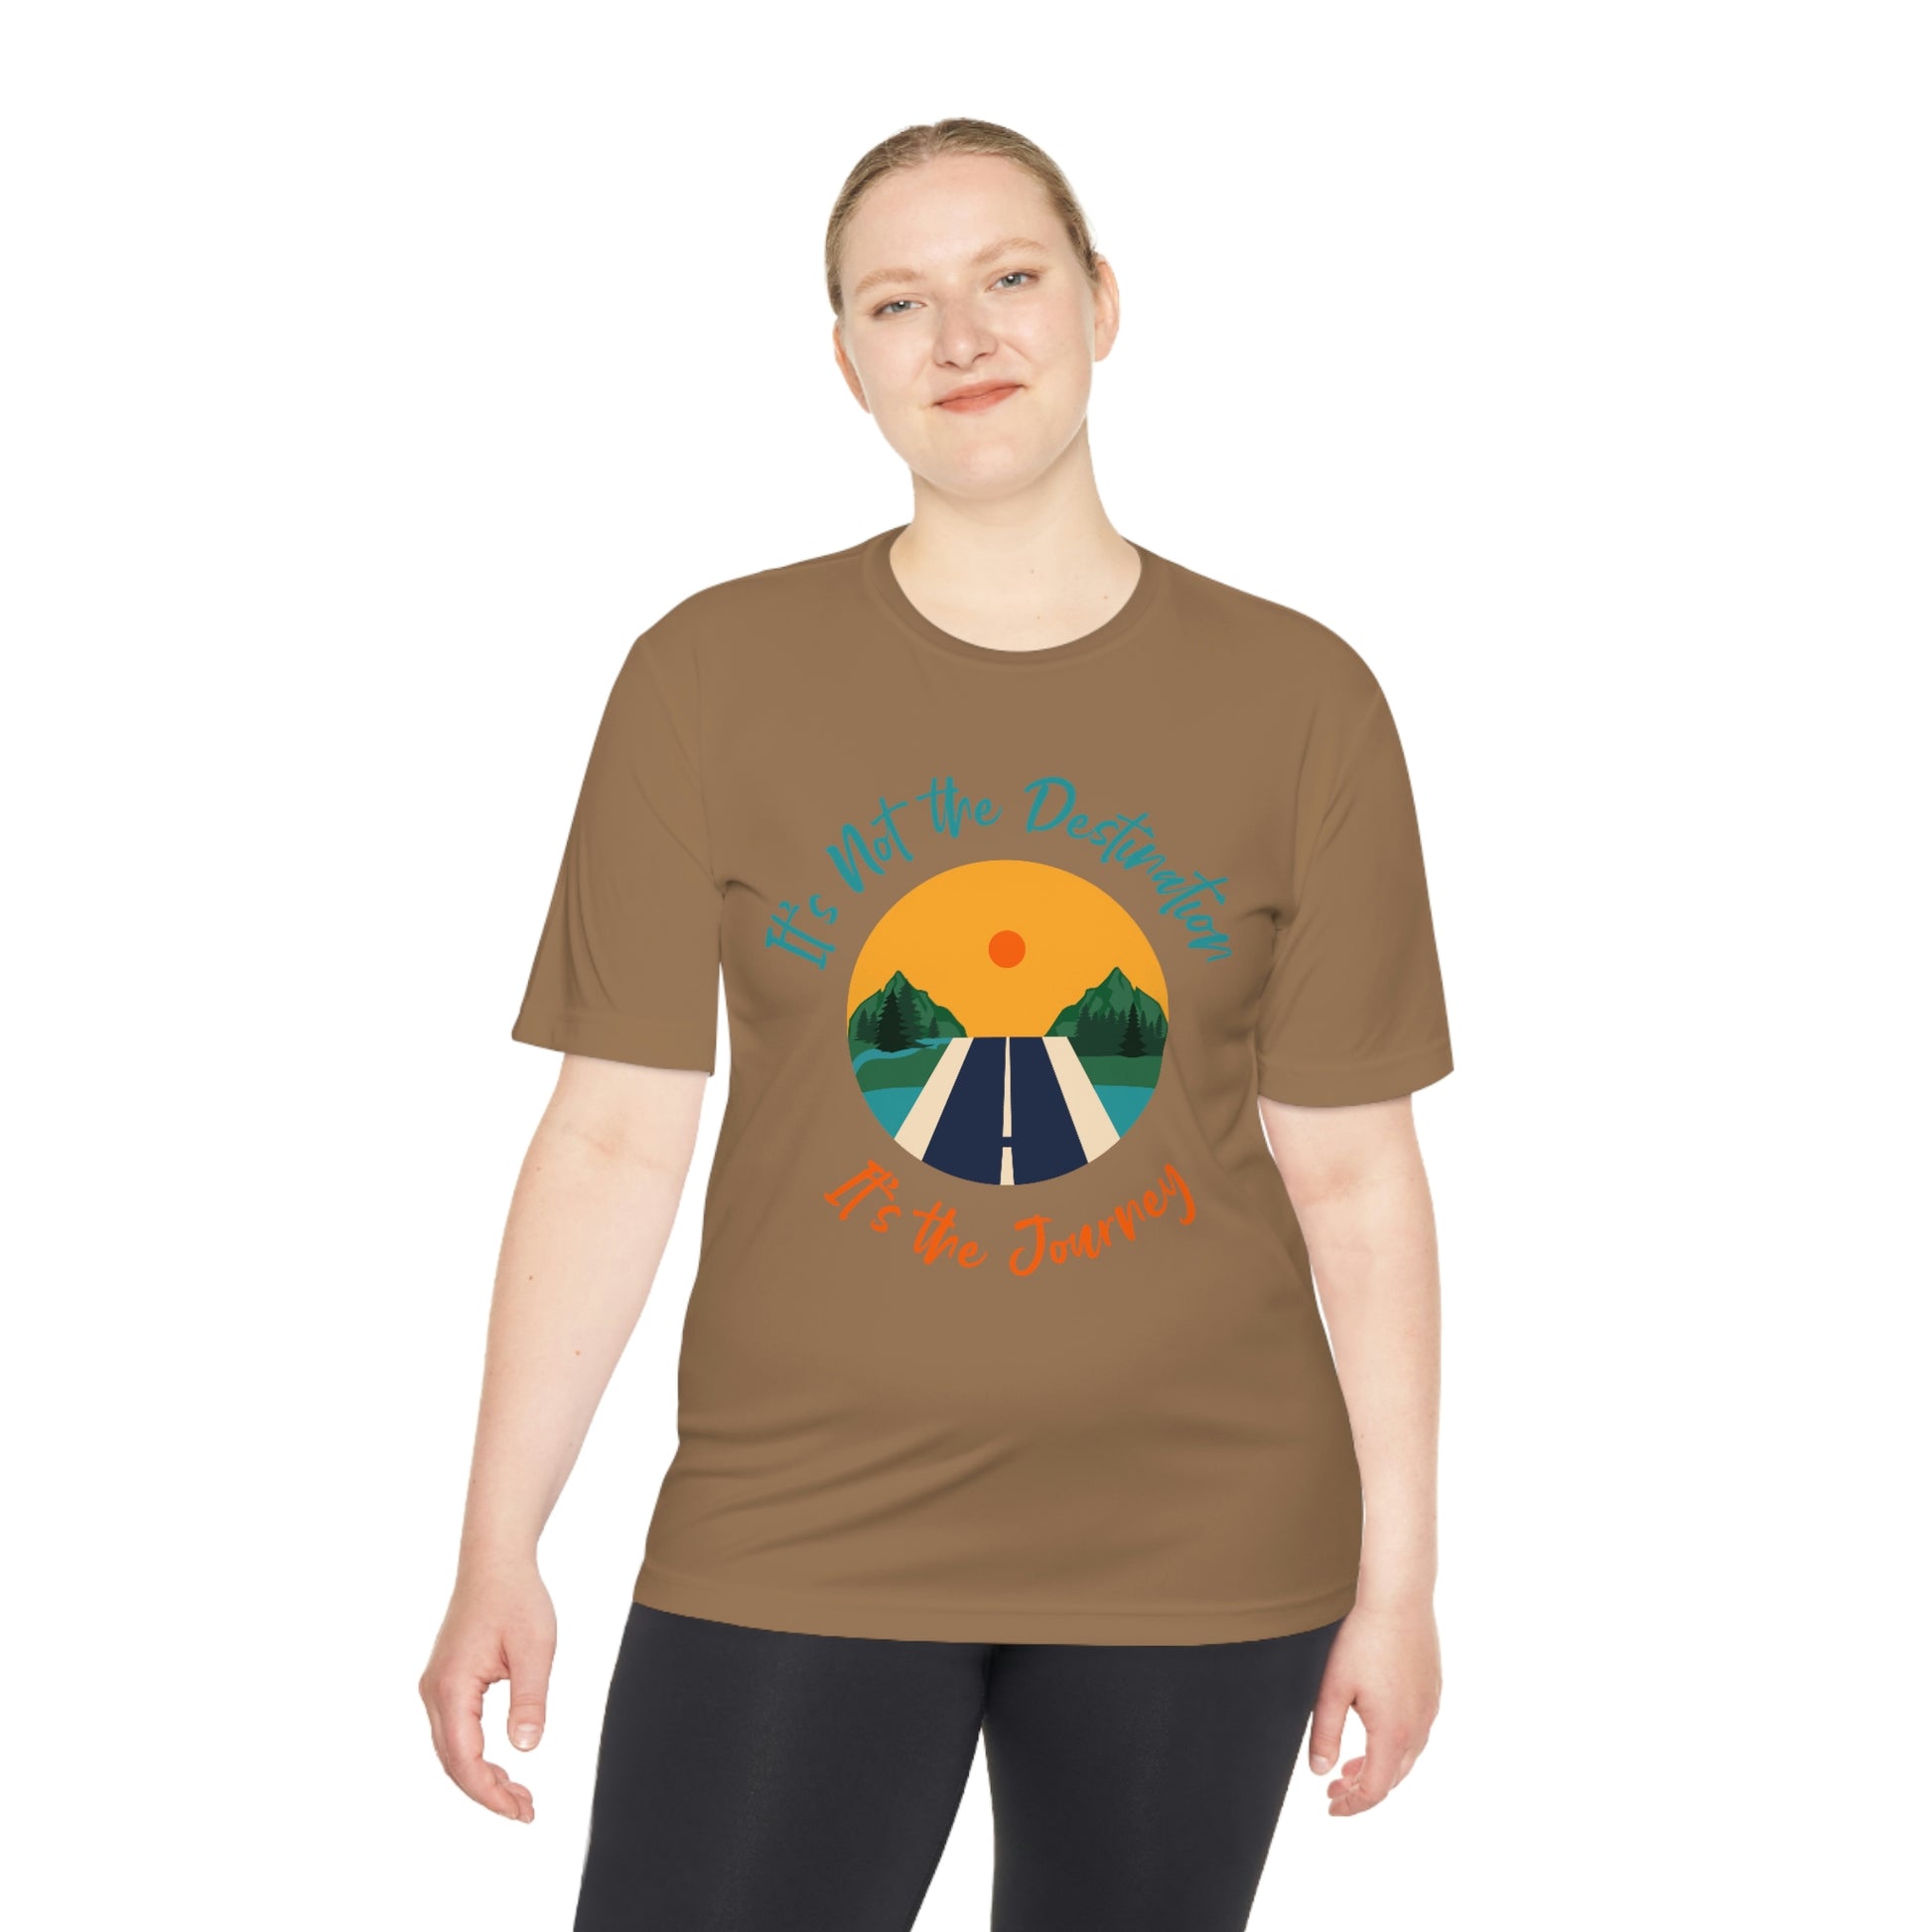 Mock up of a woman wearing the brown t-shirt